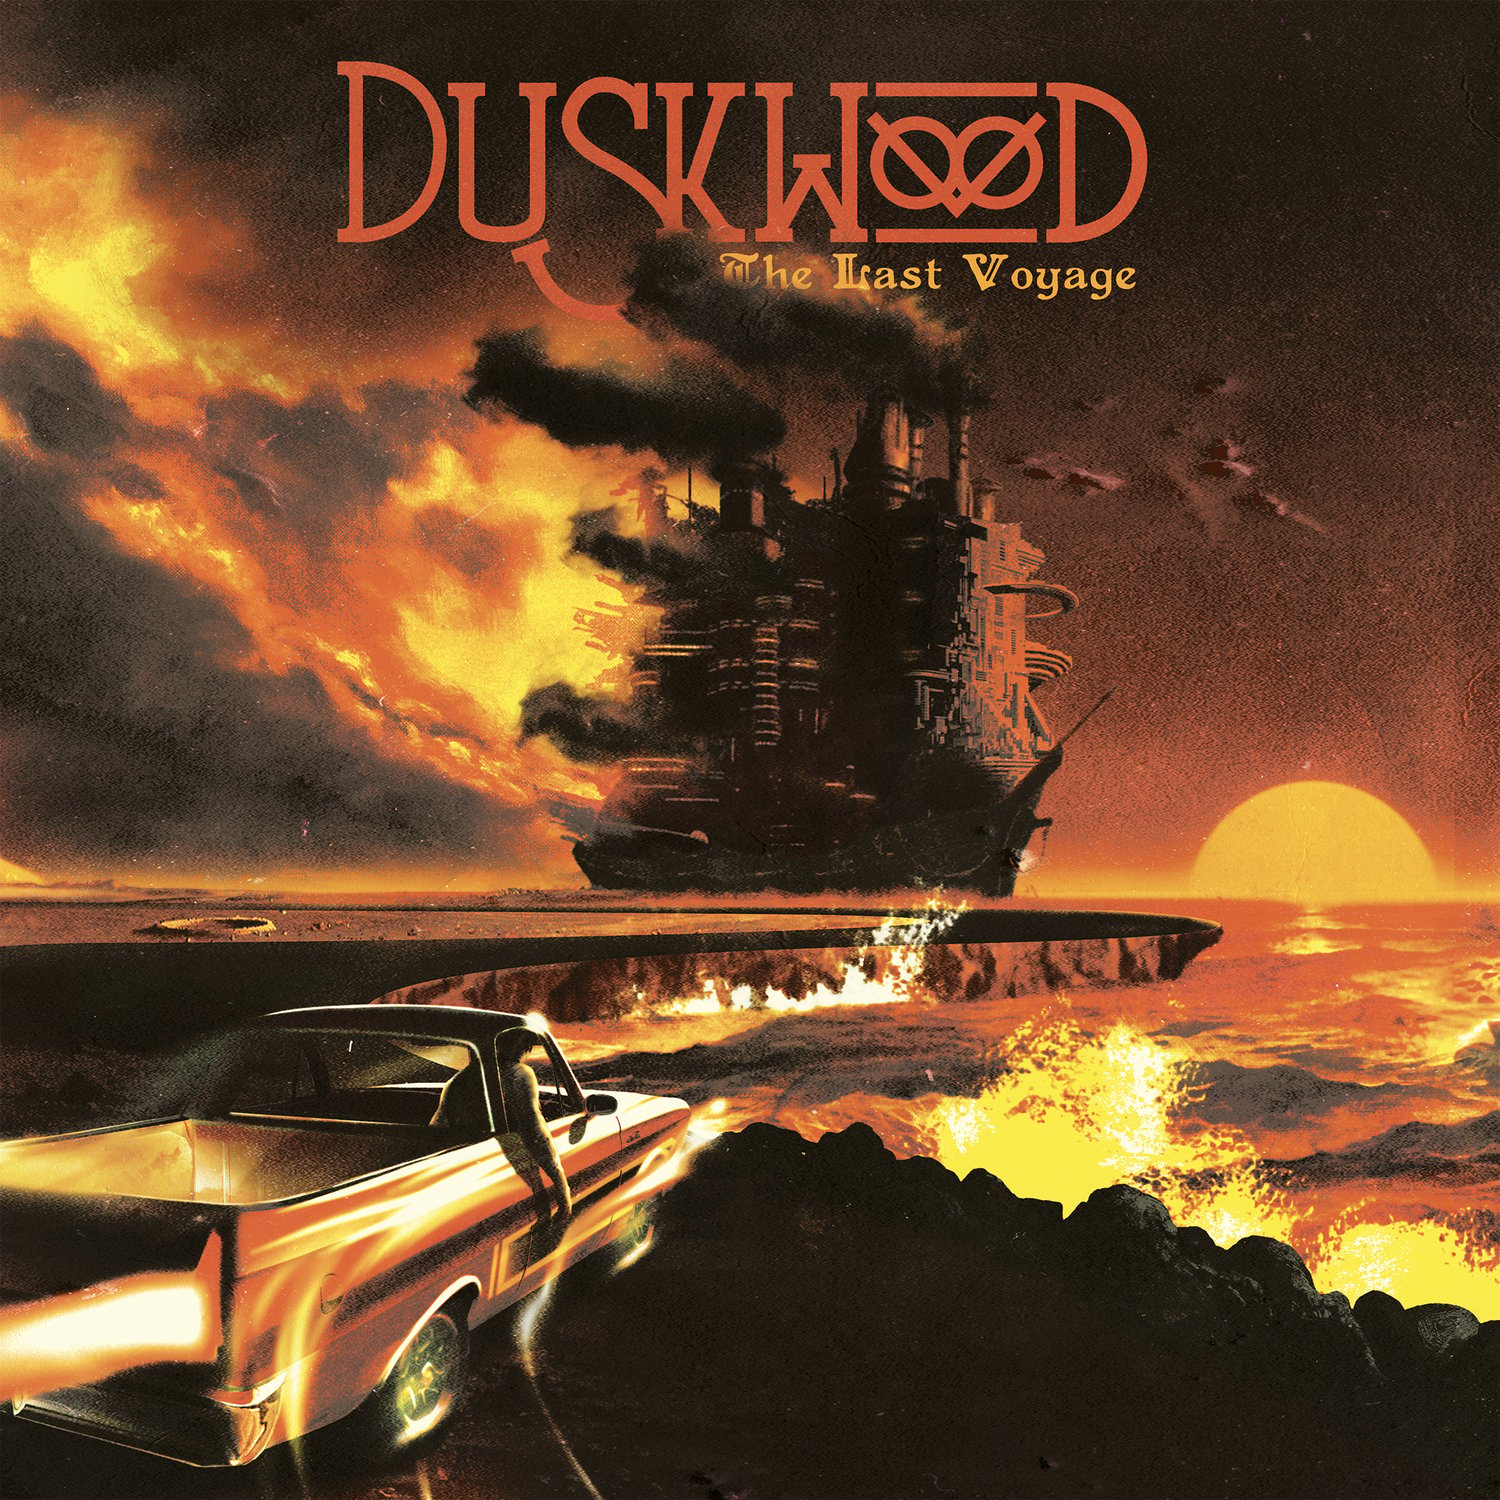 Image of Duskwood - The Last Voyage Deluxe Vinyl Editions